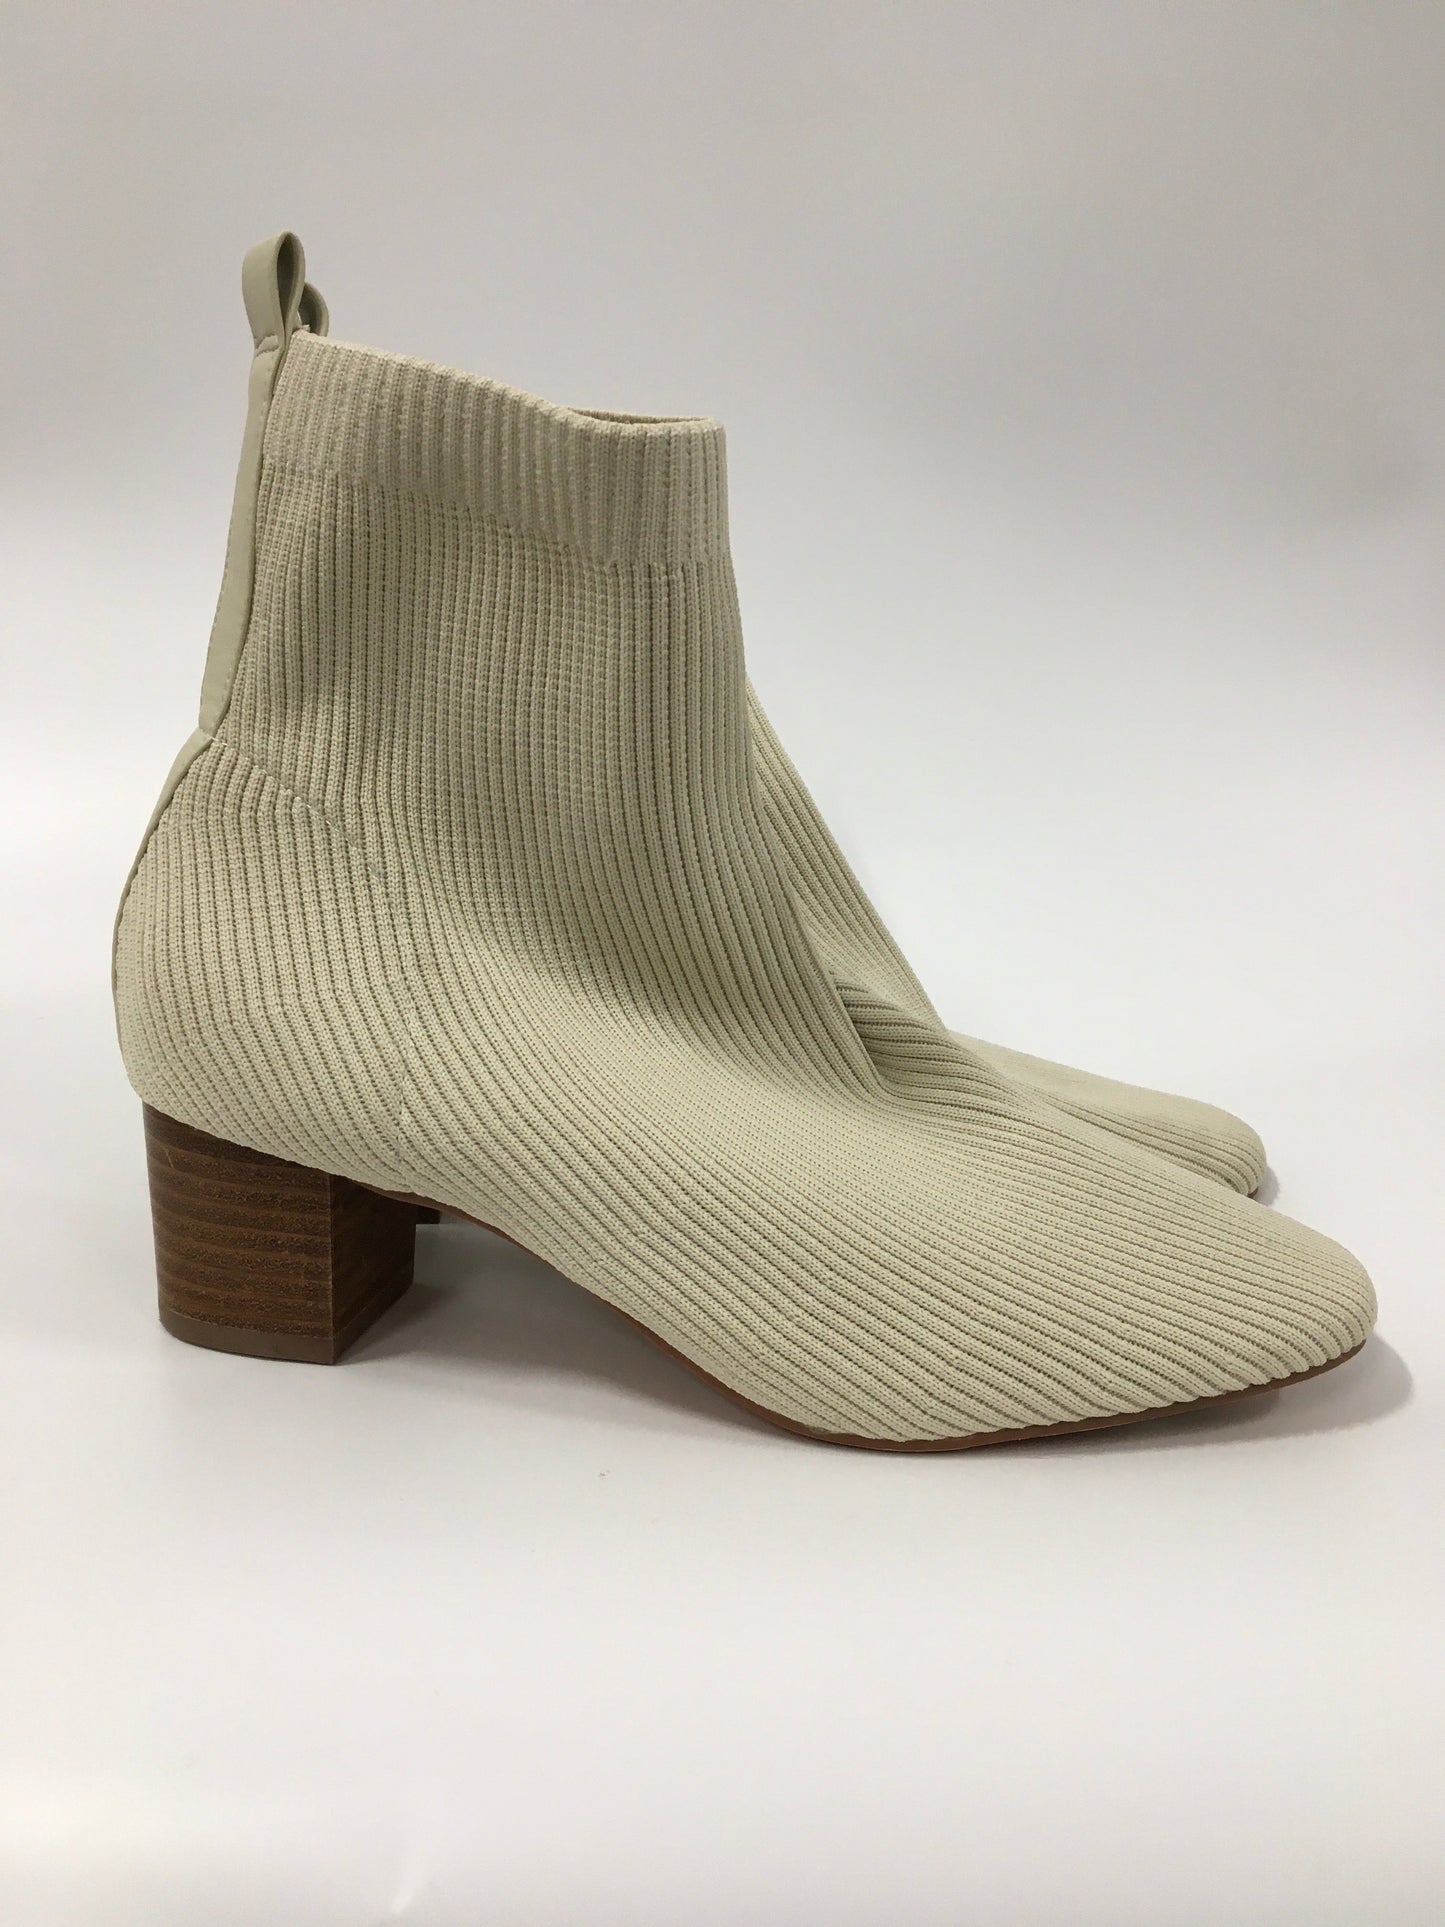 Cream Boots Ankle Heels Joie, Size 10